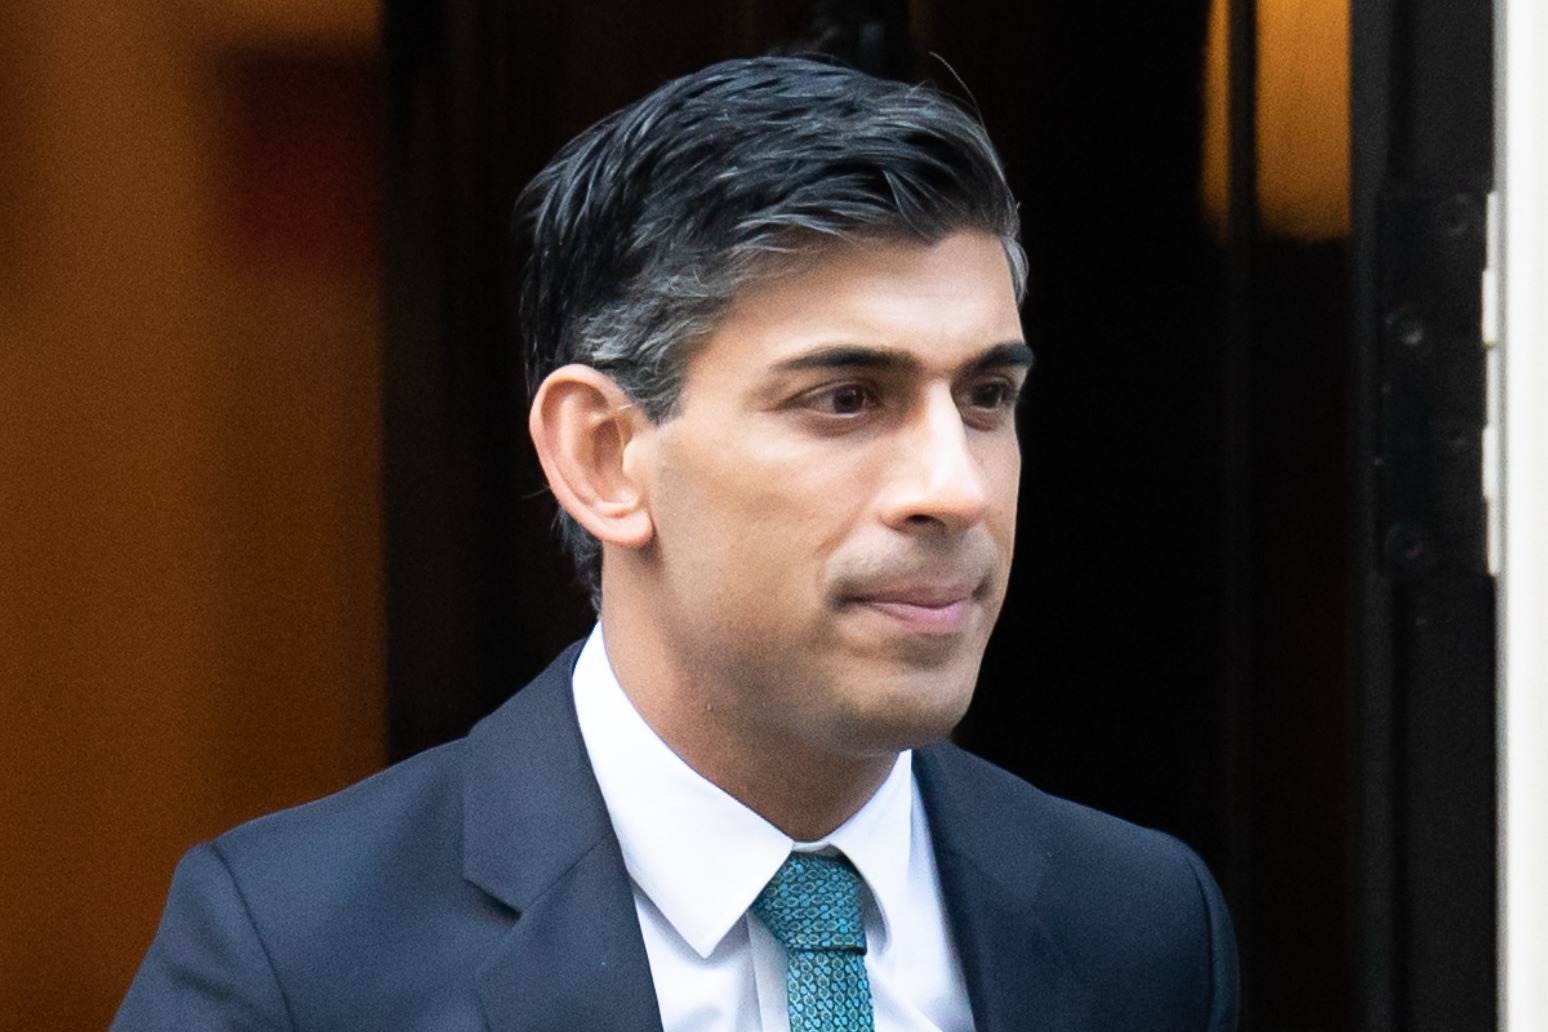 UK’s problems will not ‘go away’ in 2023, says Rishi Sunak in New Year message 